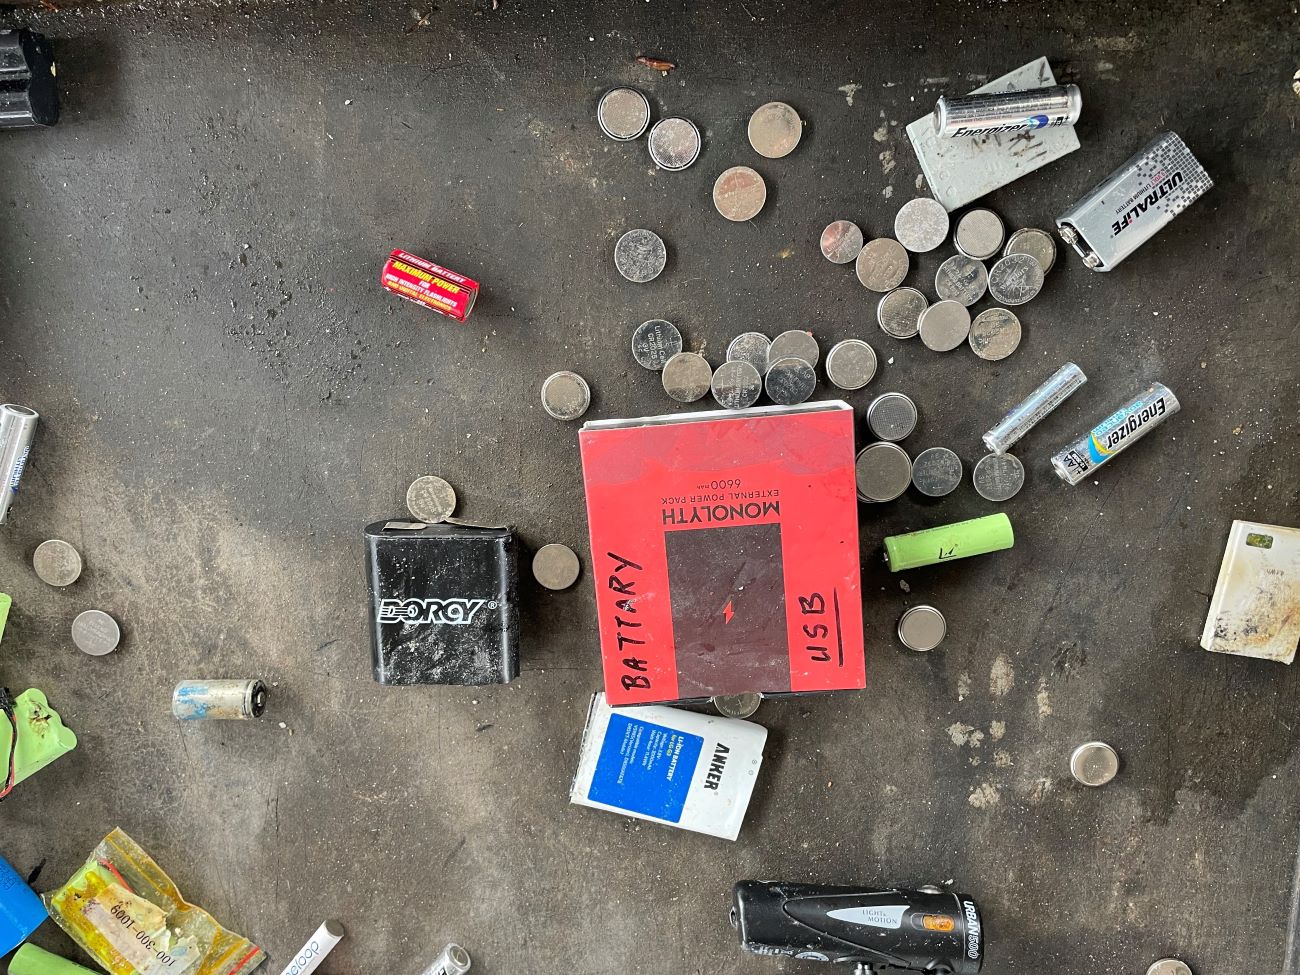 Various small batteries scattered on a table, including a bright red square battery, many loose round nickel batteries